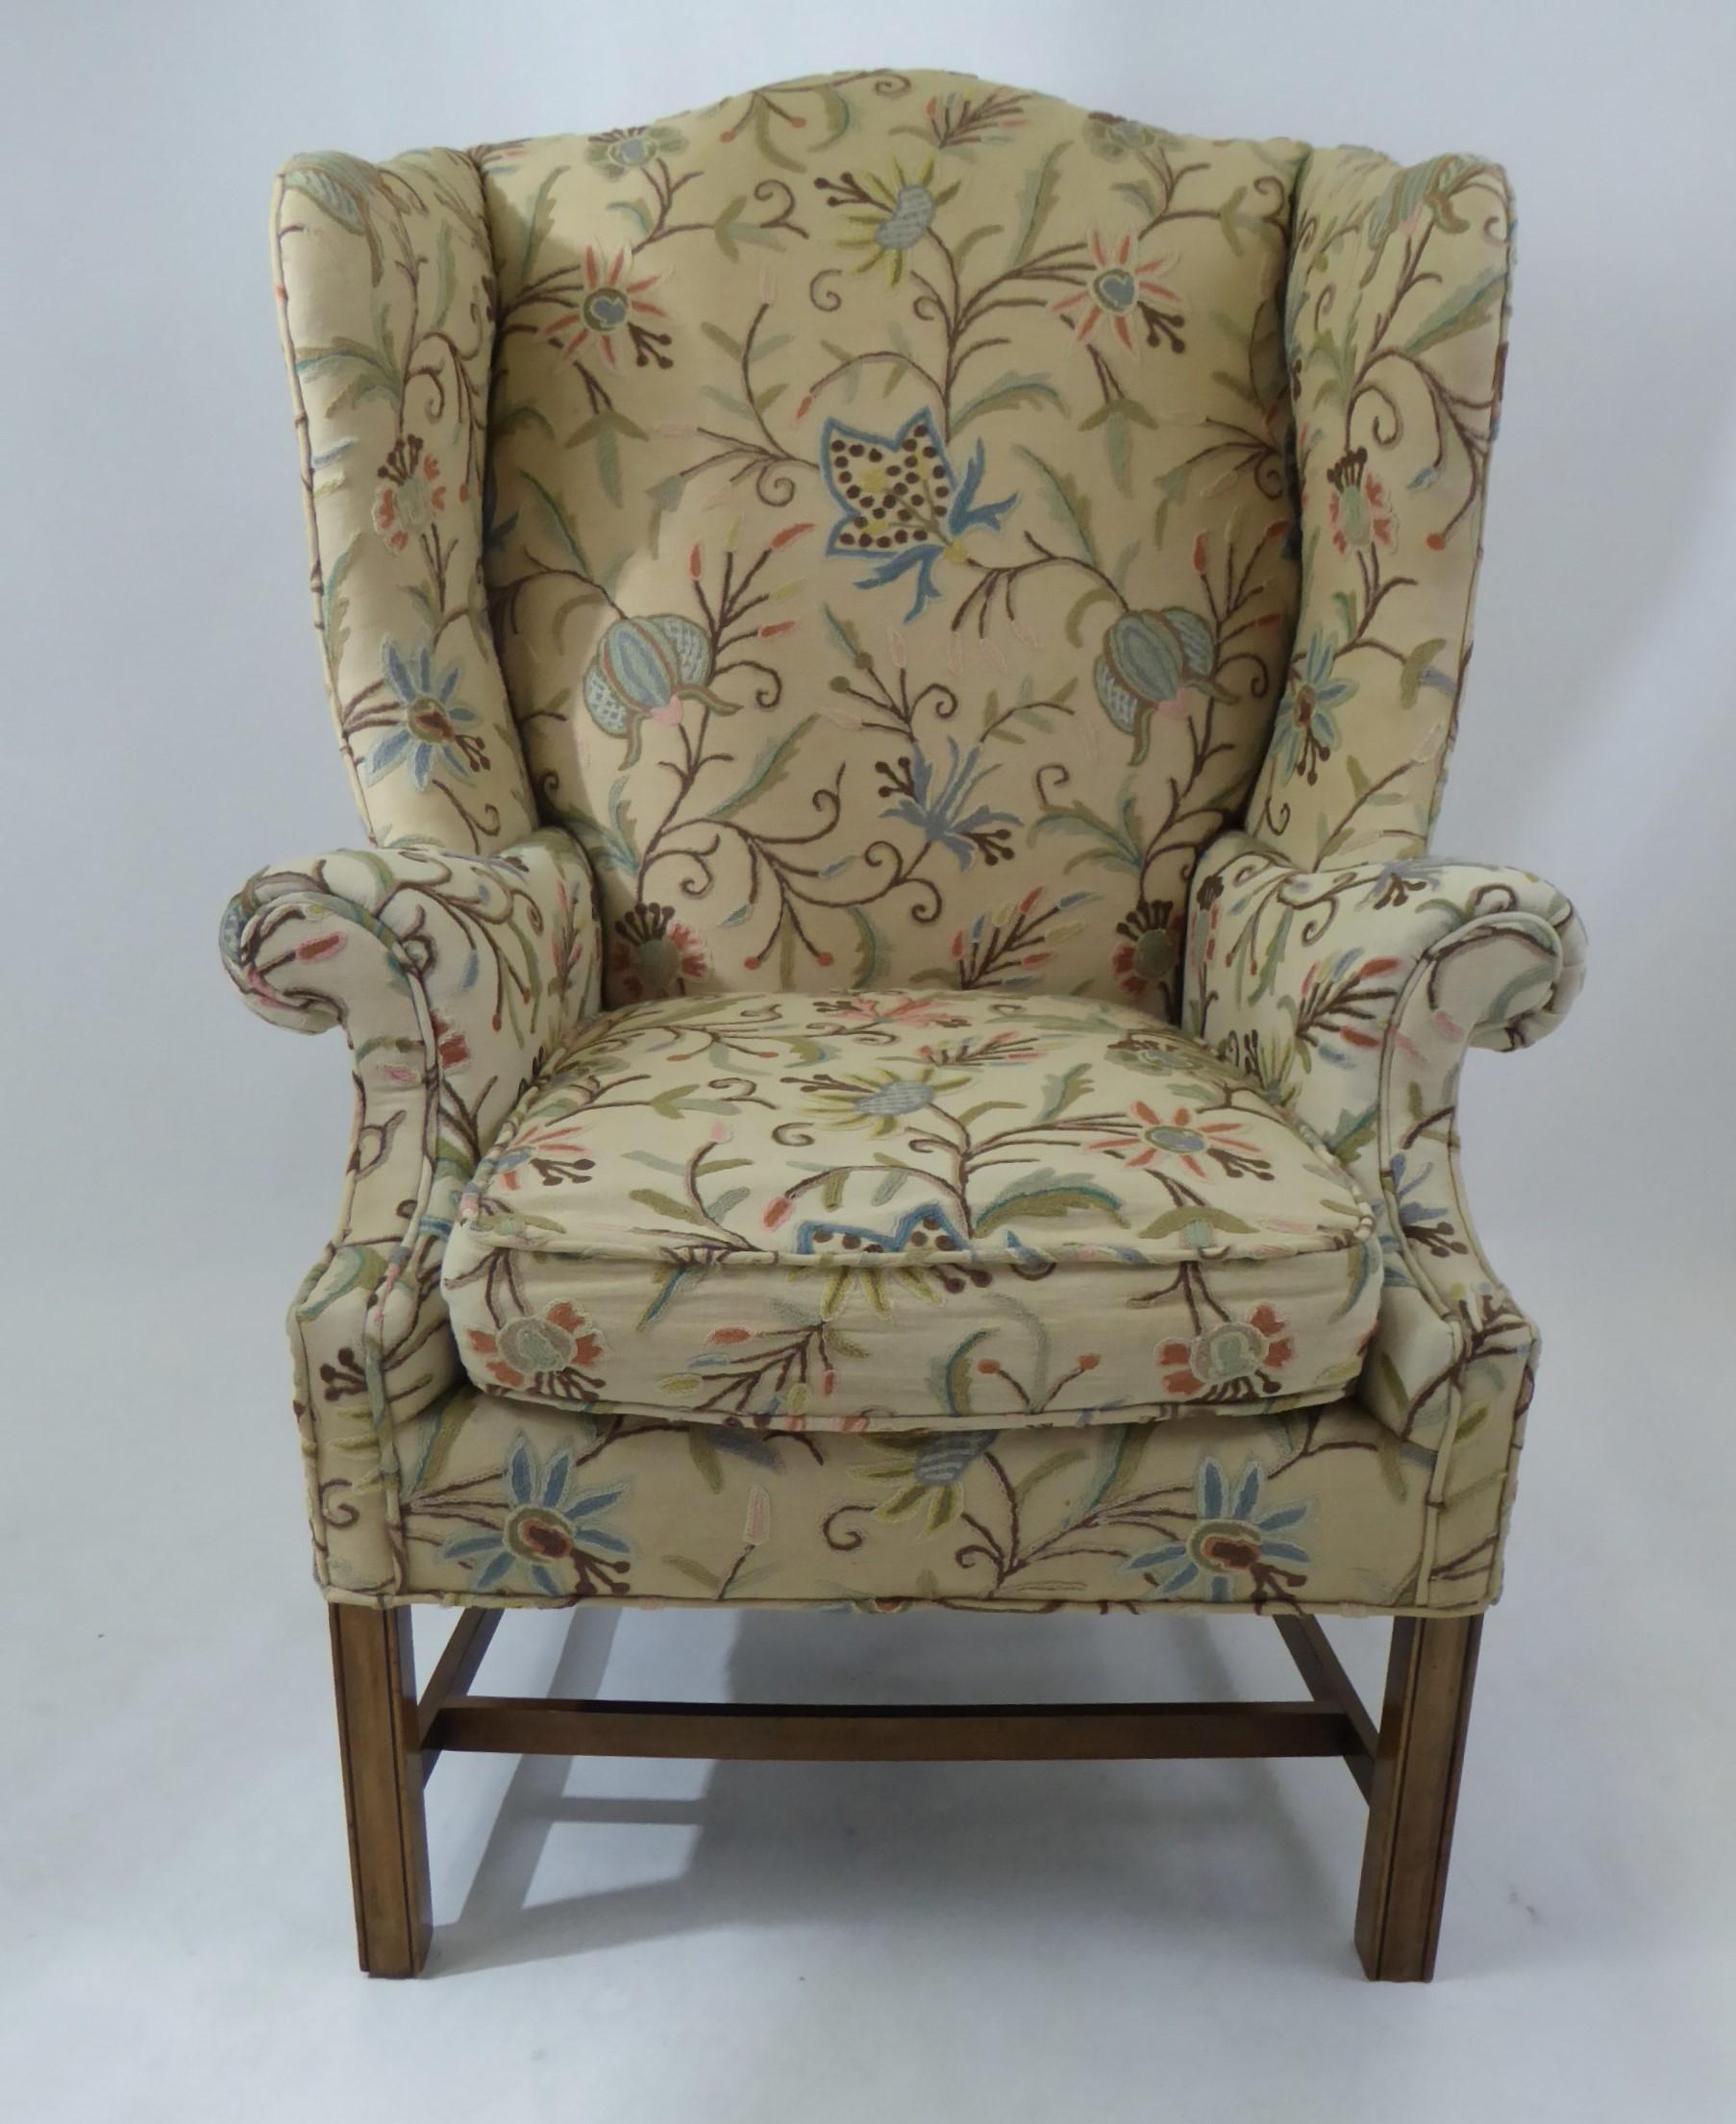 A wonderful 1950s era Baker Chippendale style wingback in a multicolor Crewel stitched fabric. Lovely floral motif in the crewel stitching, beautiful dark wood legs, great deep wings and curves. Some scratched fabric/ worn area on back left side